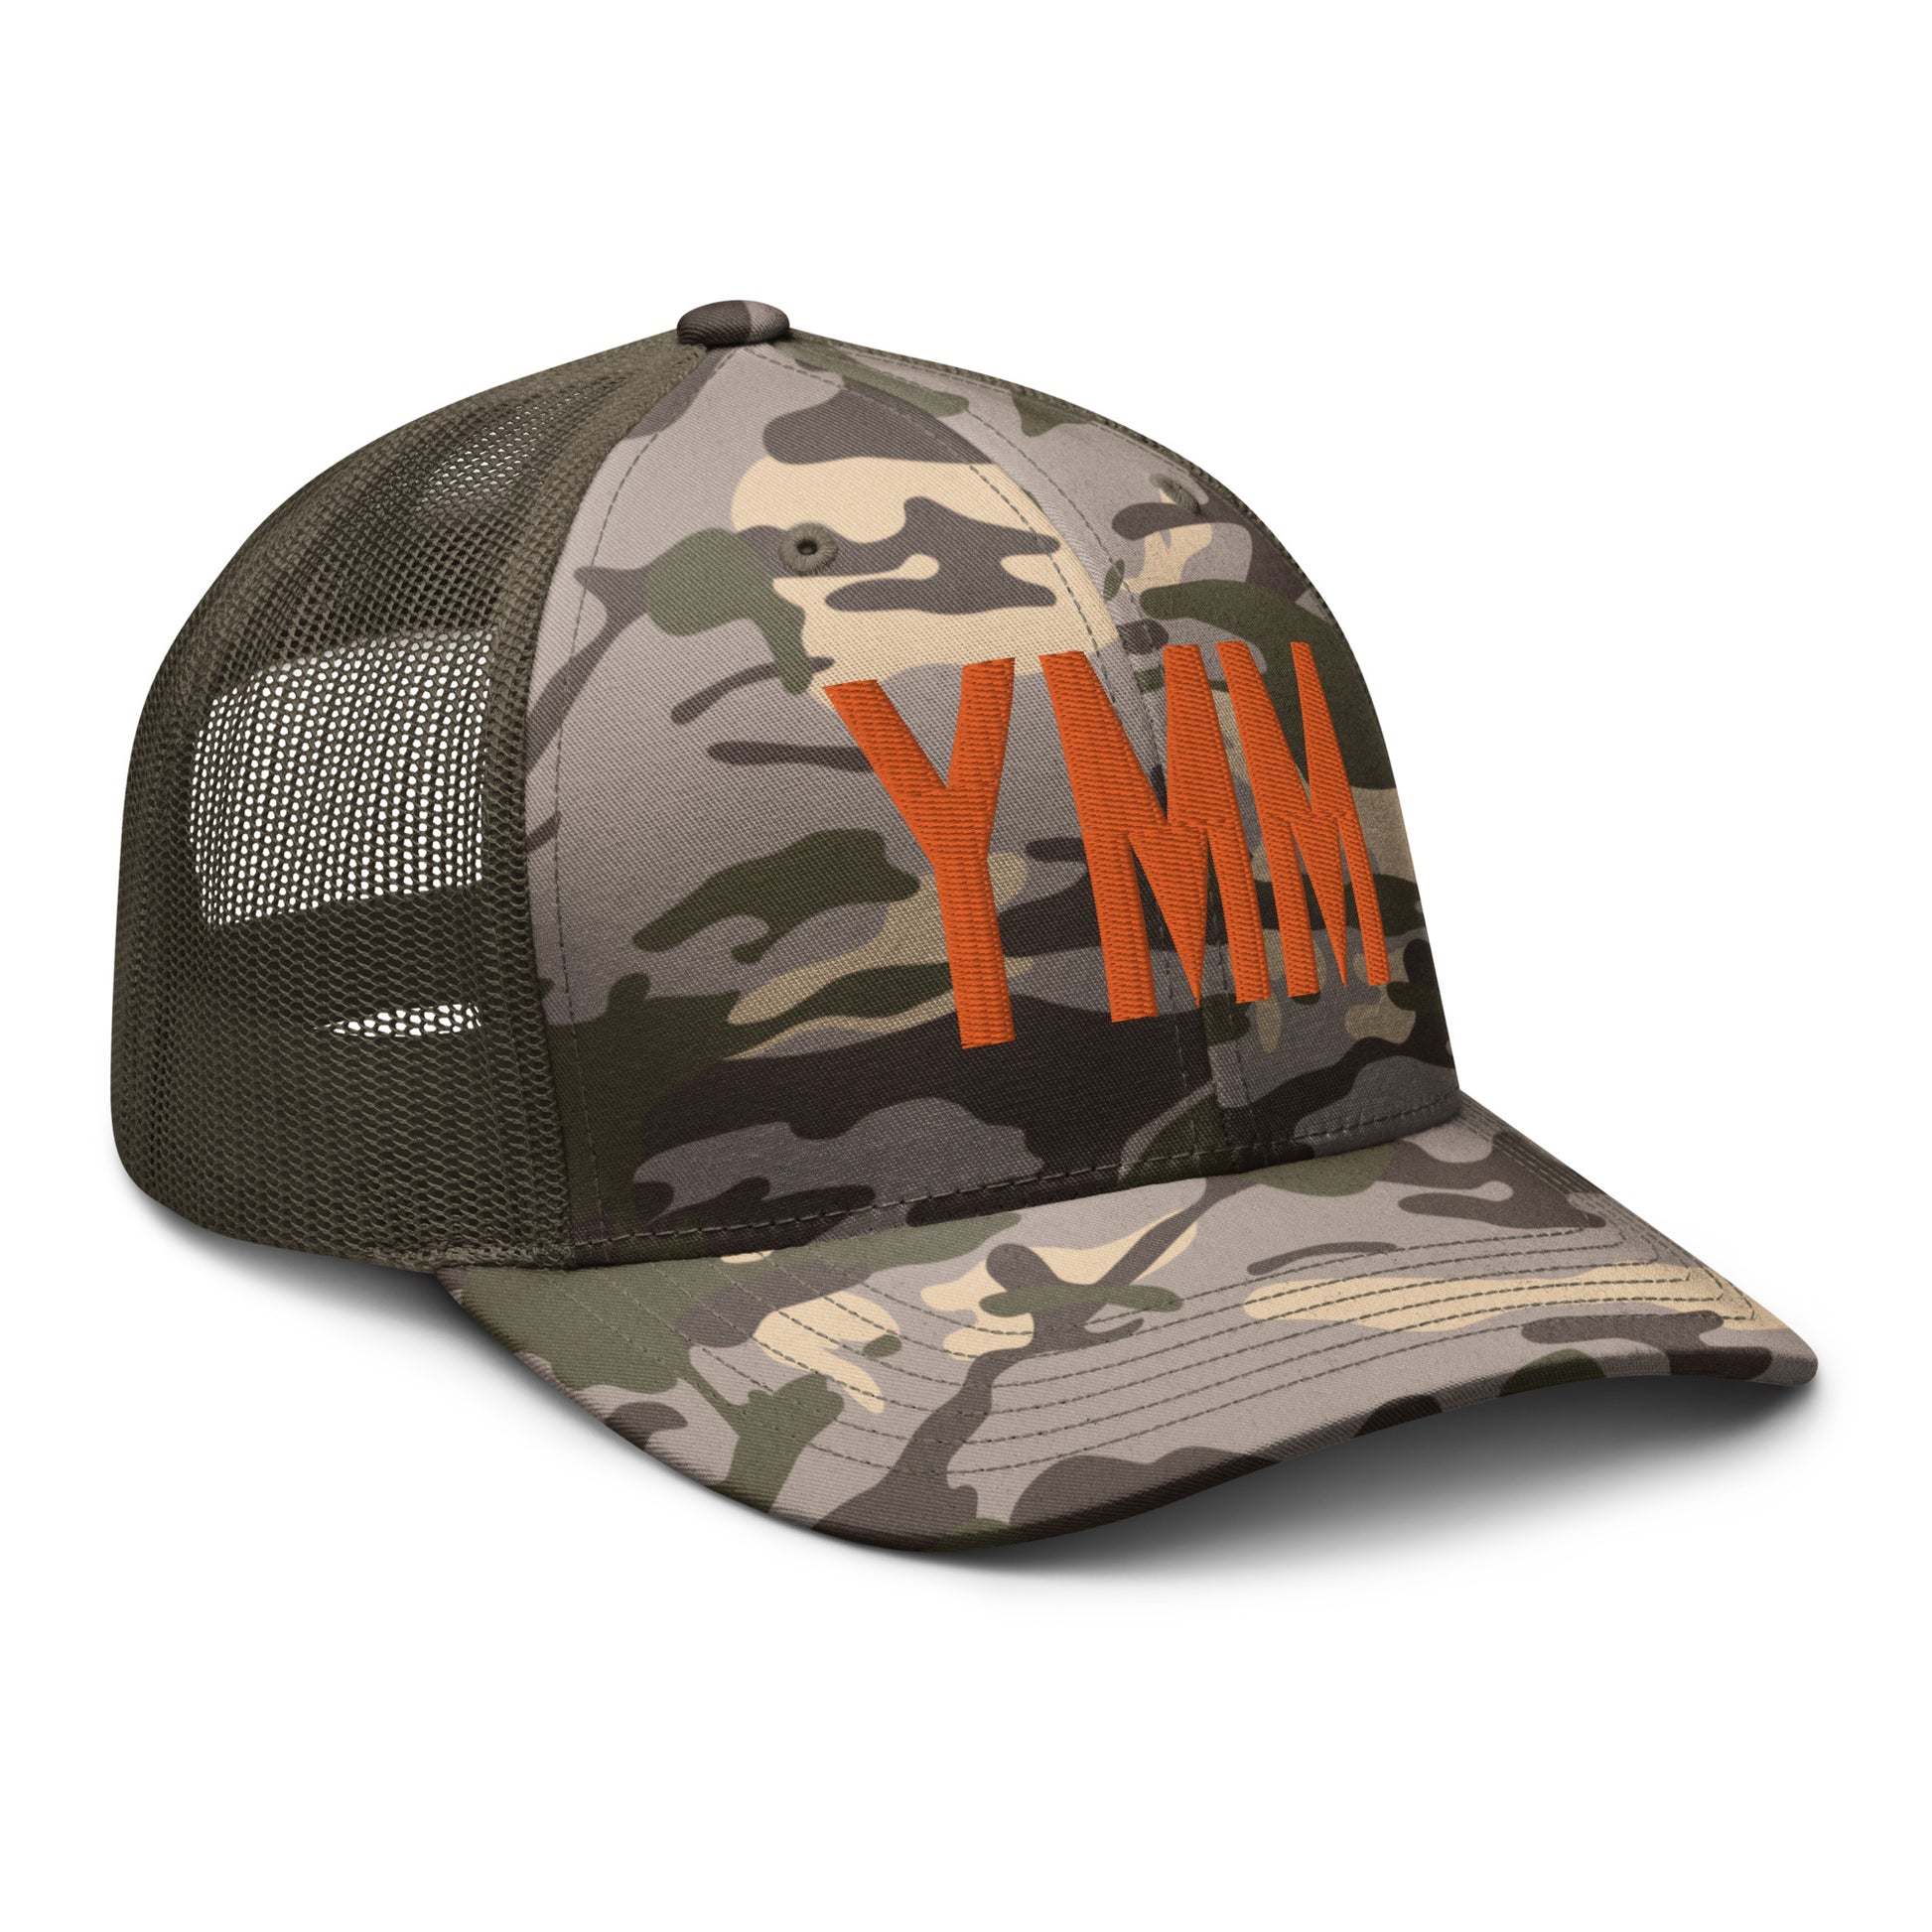 Airport Code Camouflage Trucker Hat - Orange • YMM Fort McMurray • YHM Designs - Image 20